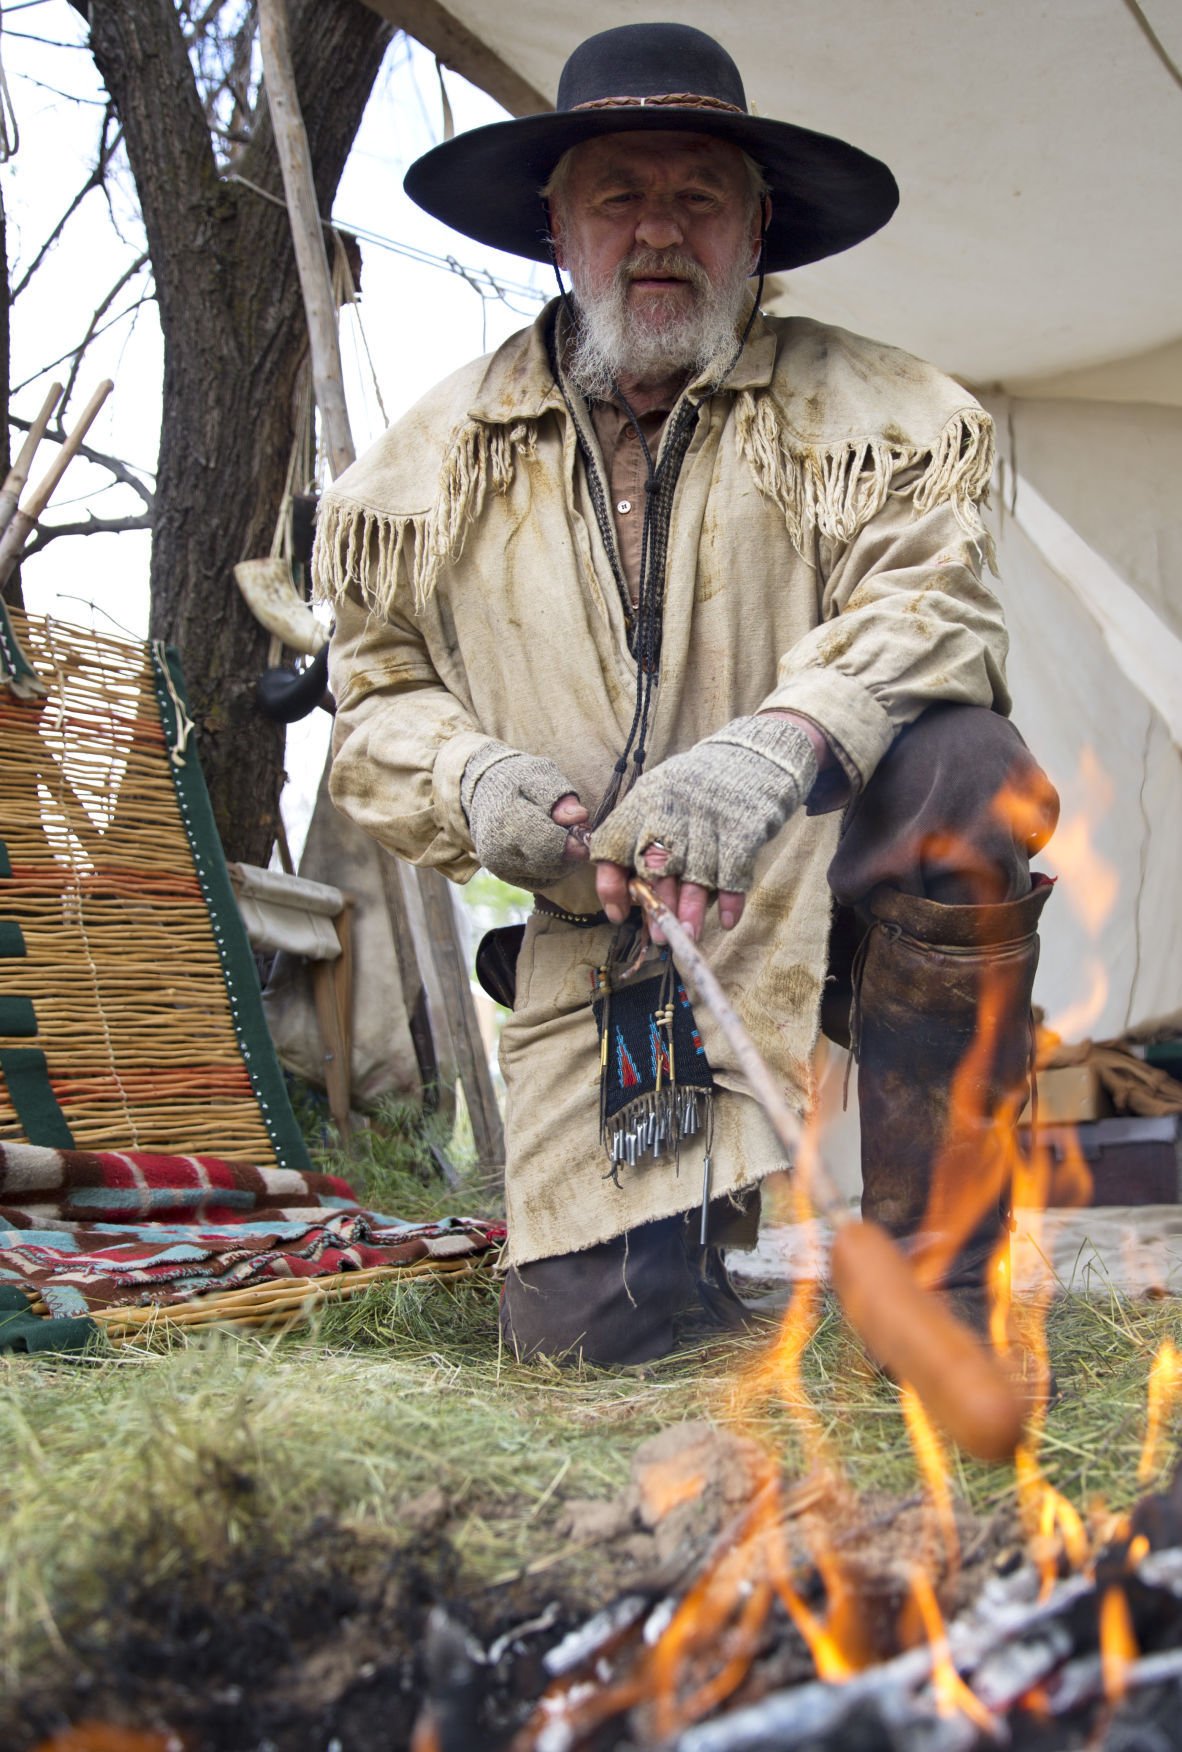 Gallery At the mountain man rendezvous Outdoors and Recreation